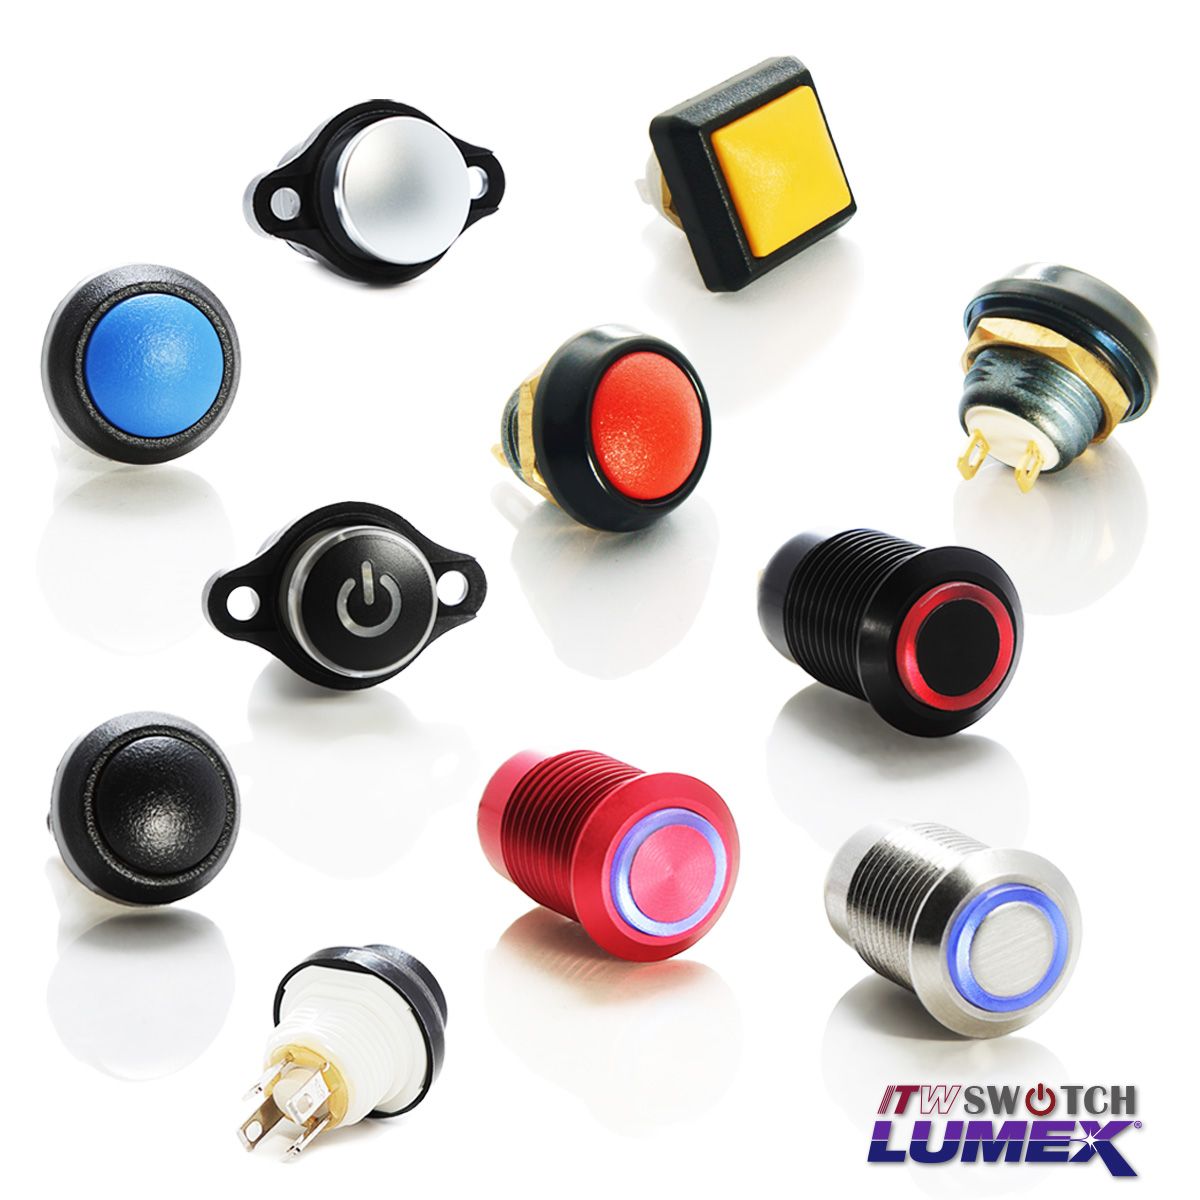 ITW Lumex Switch provides a variety of push button designs that can be installed in a 12mm panel cutout.